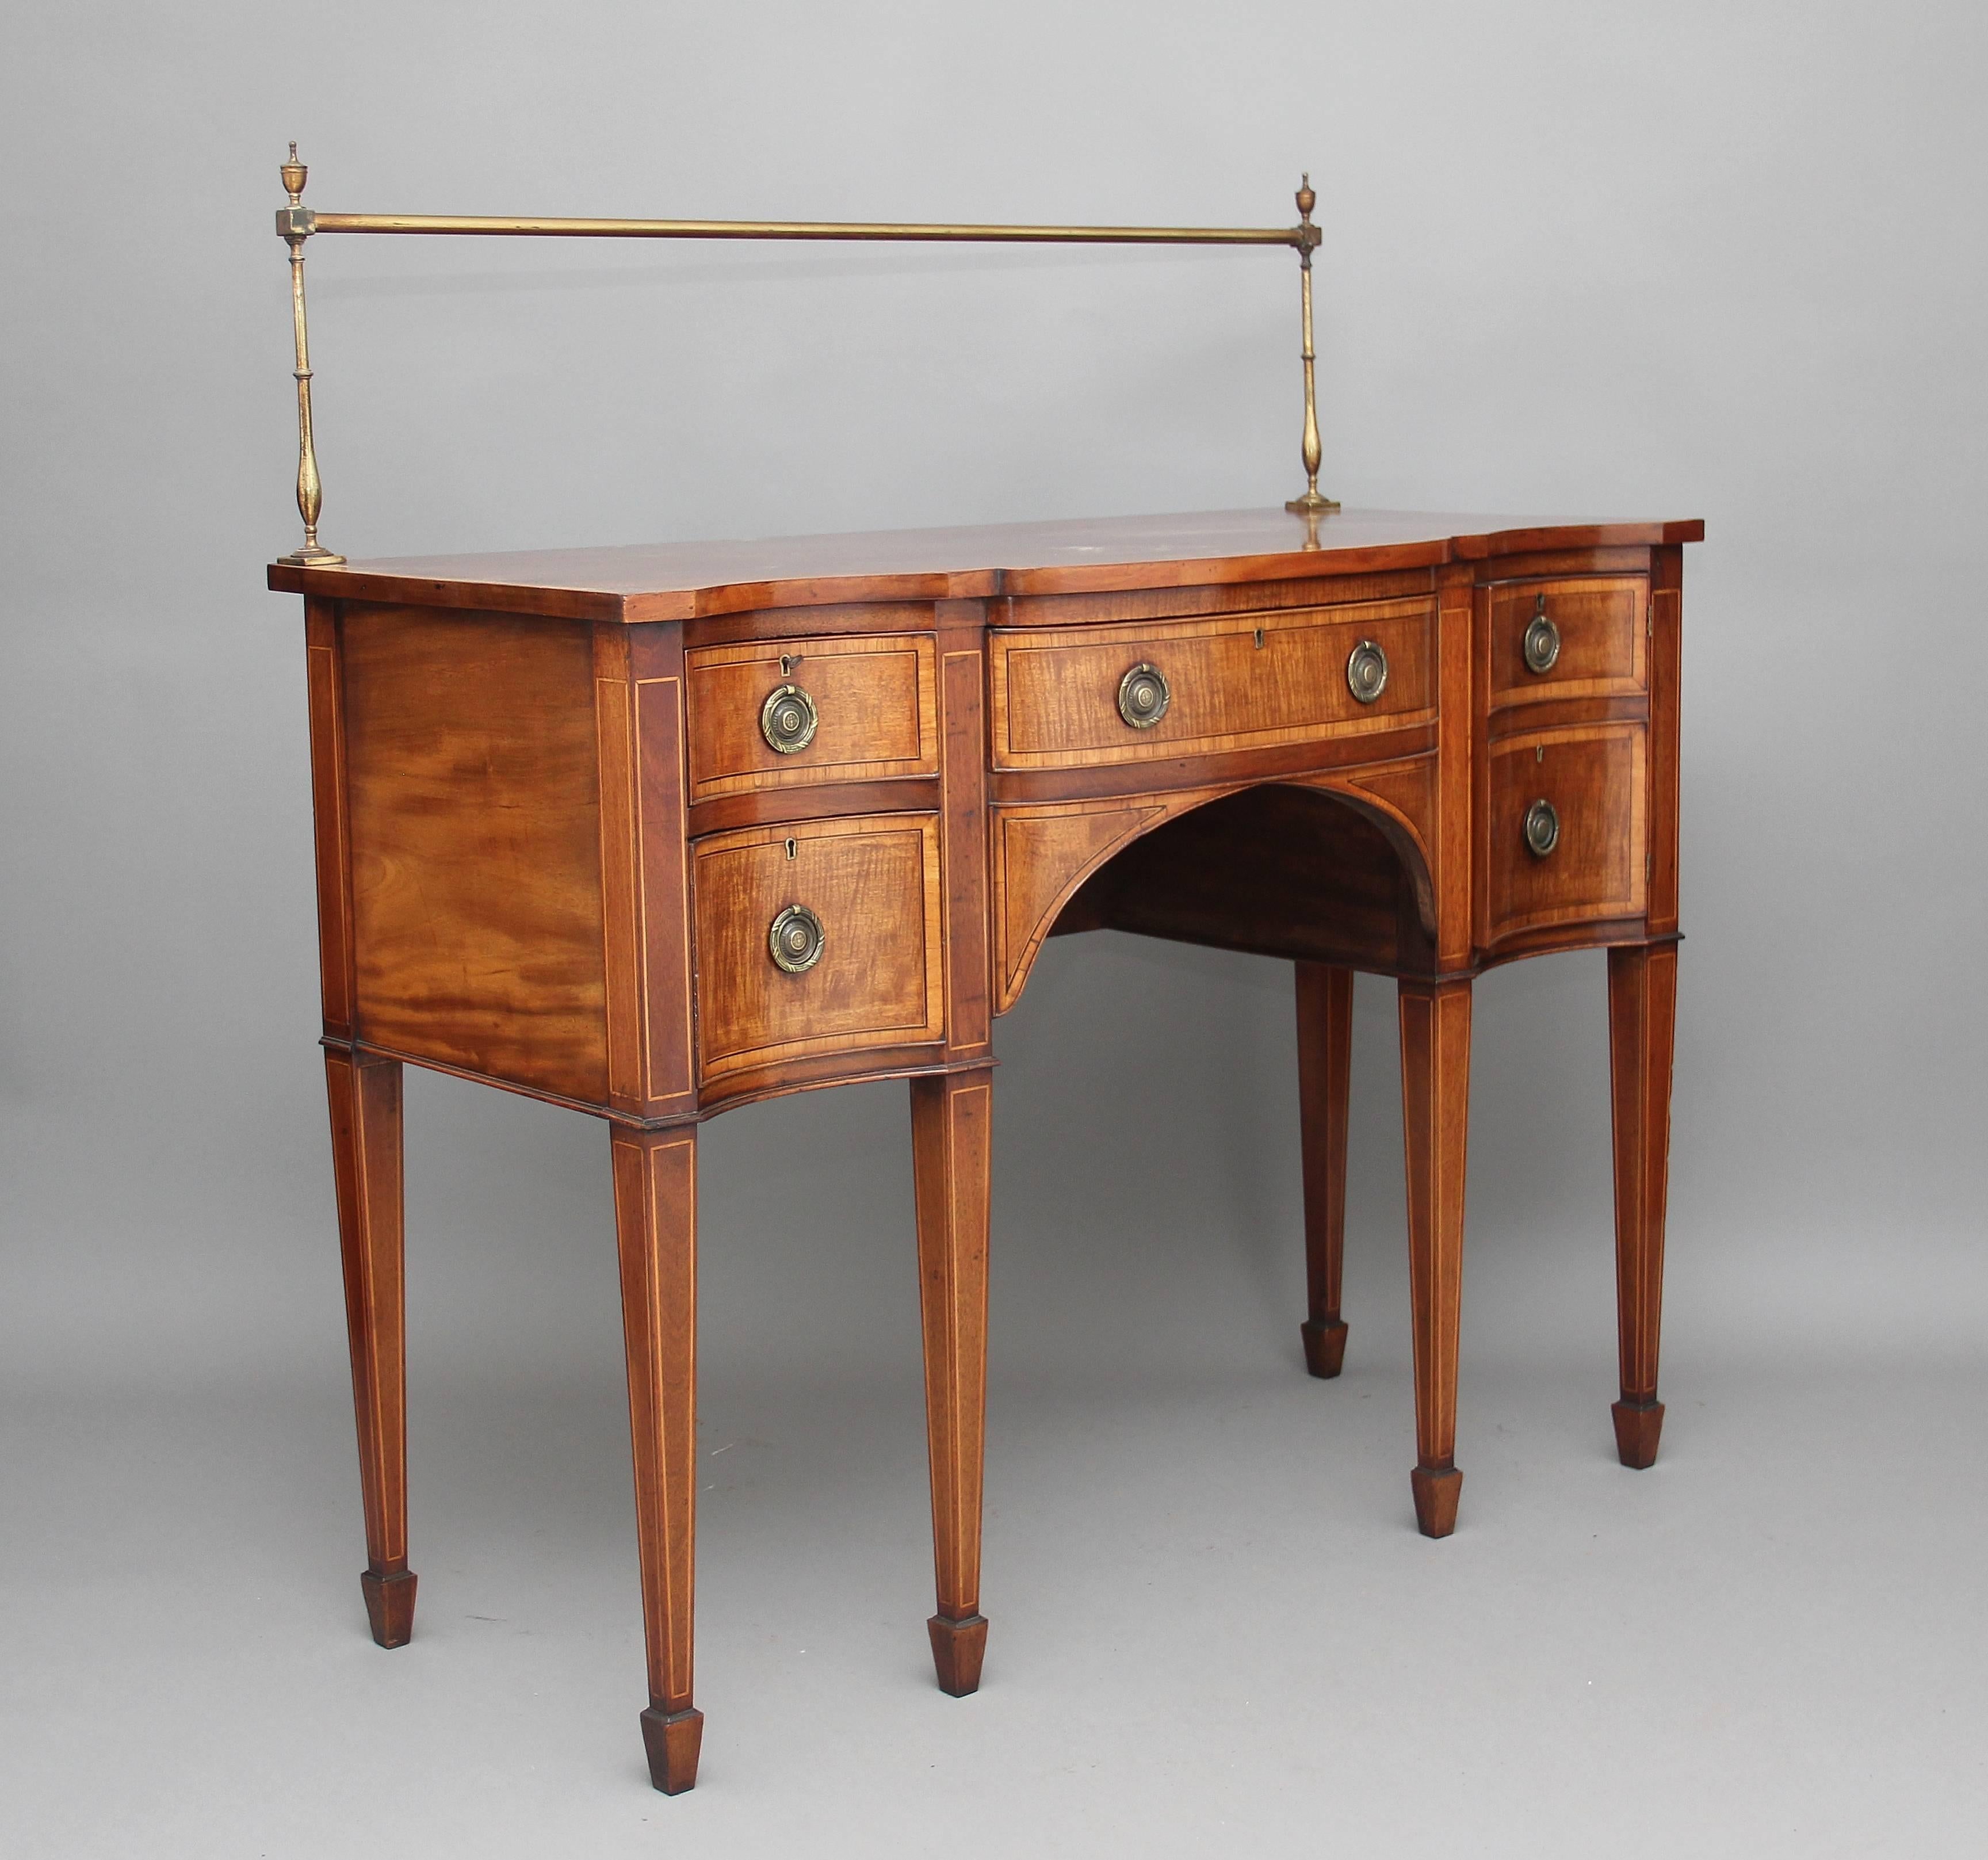 Early 20th century mahogany serpentine sideboard with a nice shaped top with satinwood crossbanding, the back of the top having a brass gallery, the sideboard having a single central drawer with two graduated drawers to the left and a cupboard to